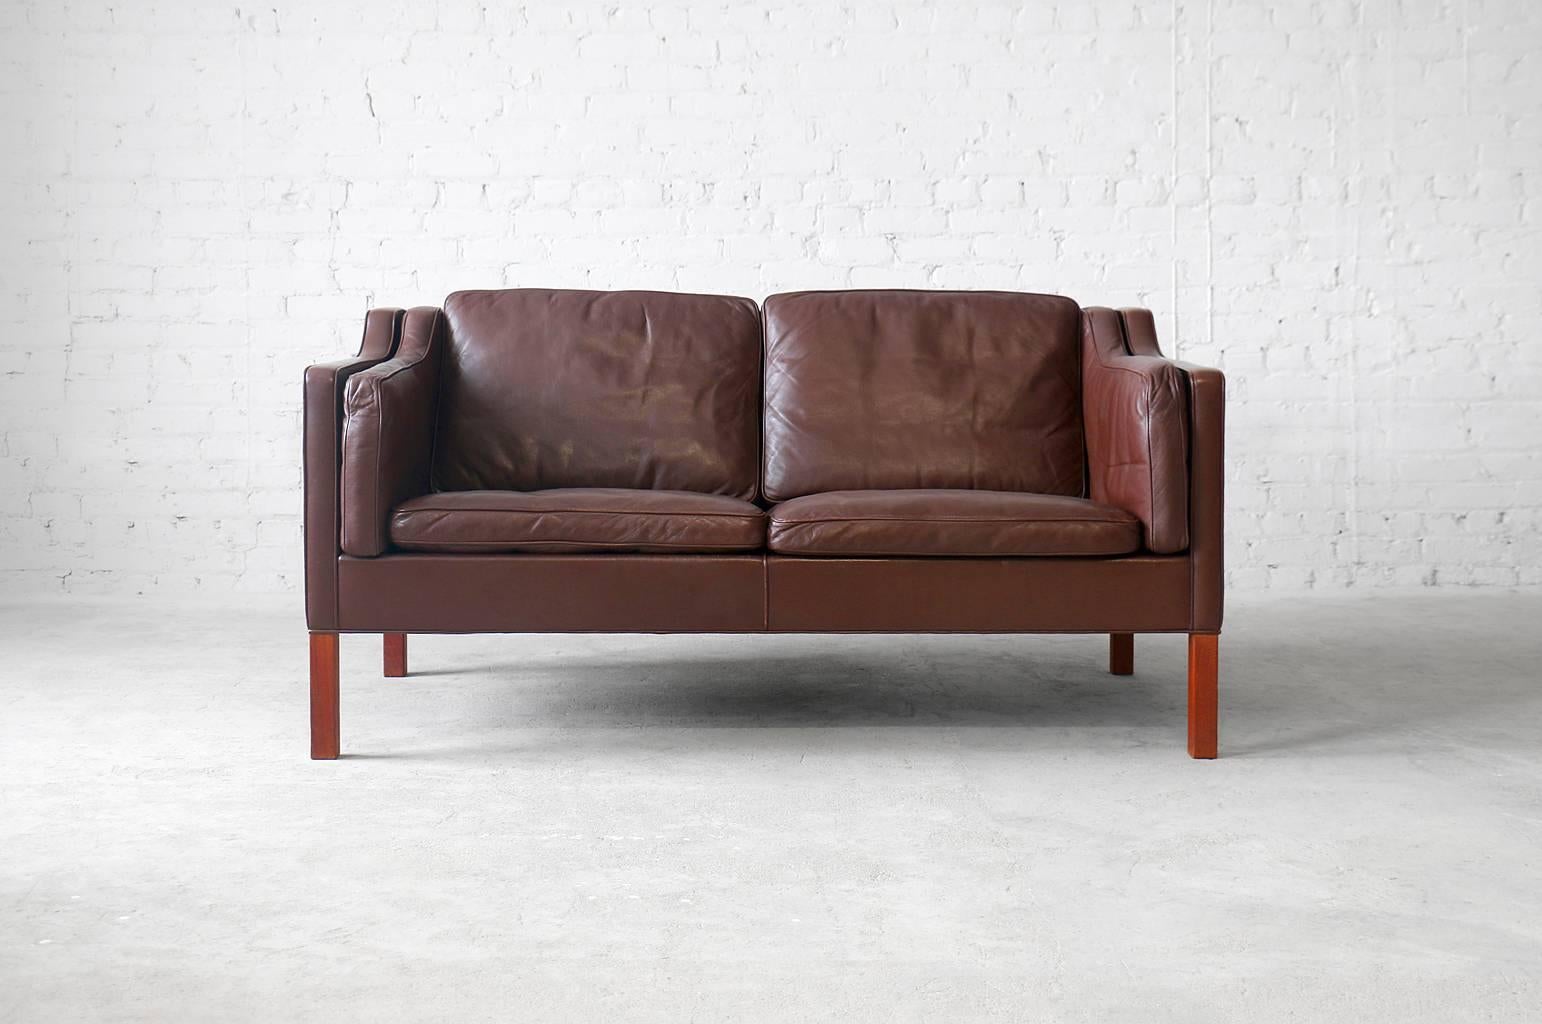 A Classic Danish sofa designed by Børge Mogensen for Fredericia. Solid legs and solid wood frame set this design apart. Only the best materials are used in the production of this design. Unmatched quality!

- Model #2212 designed in 1963
- Solid